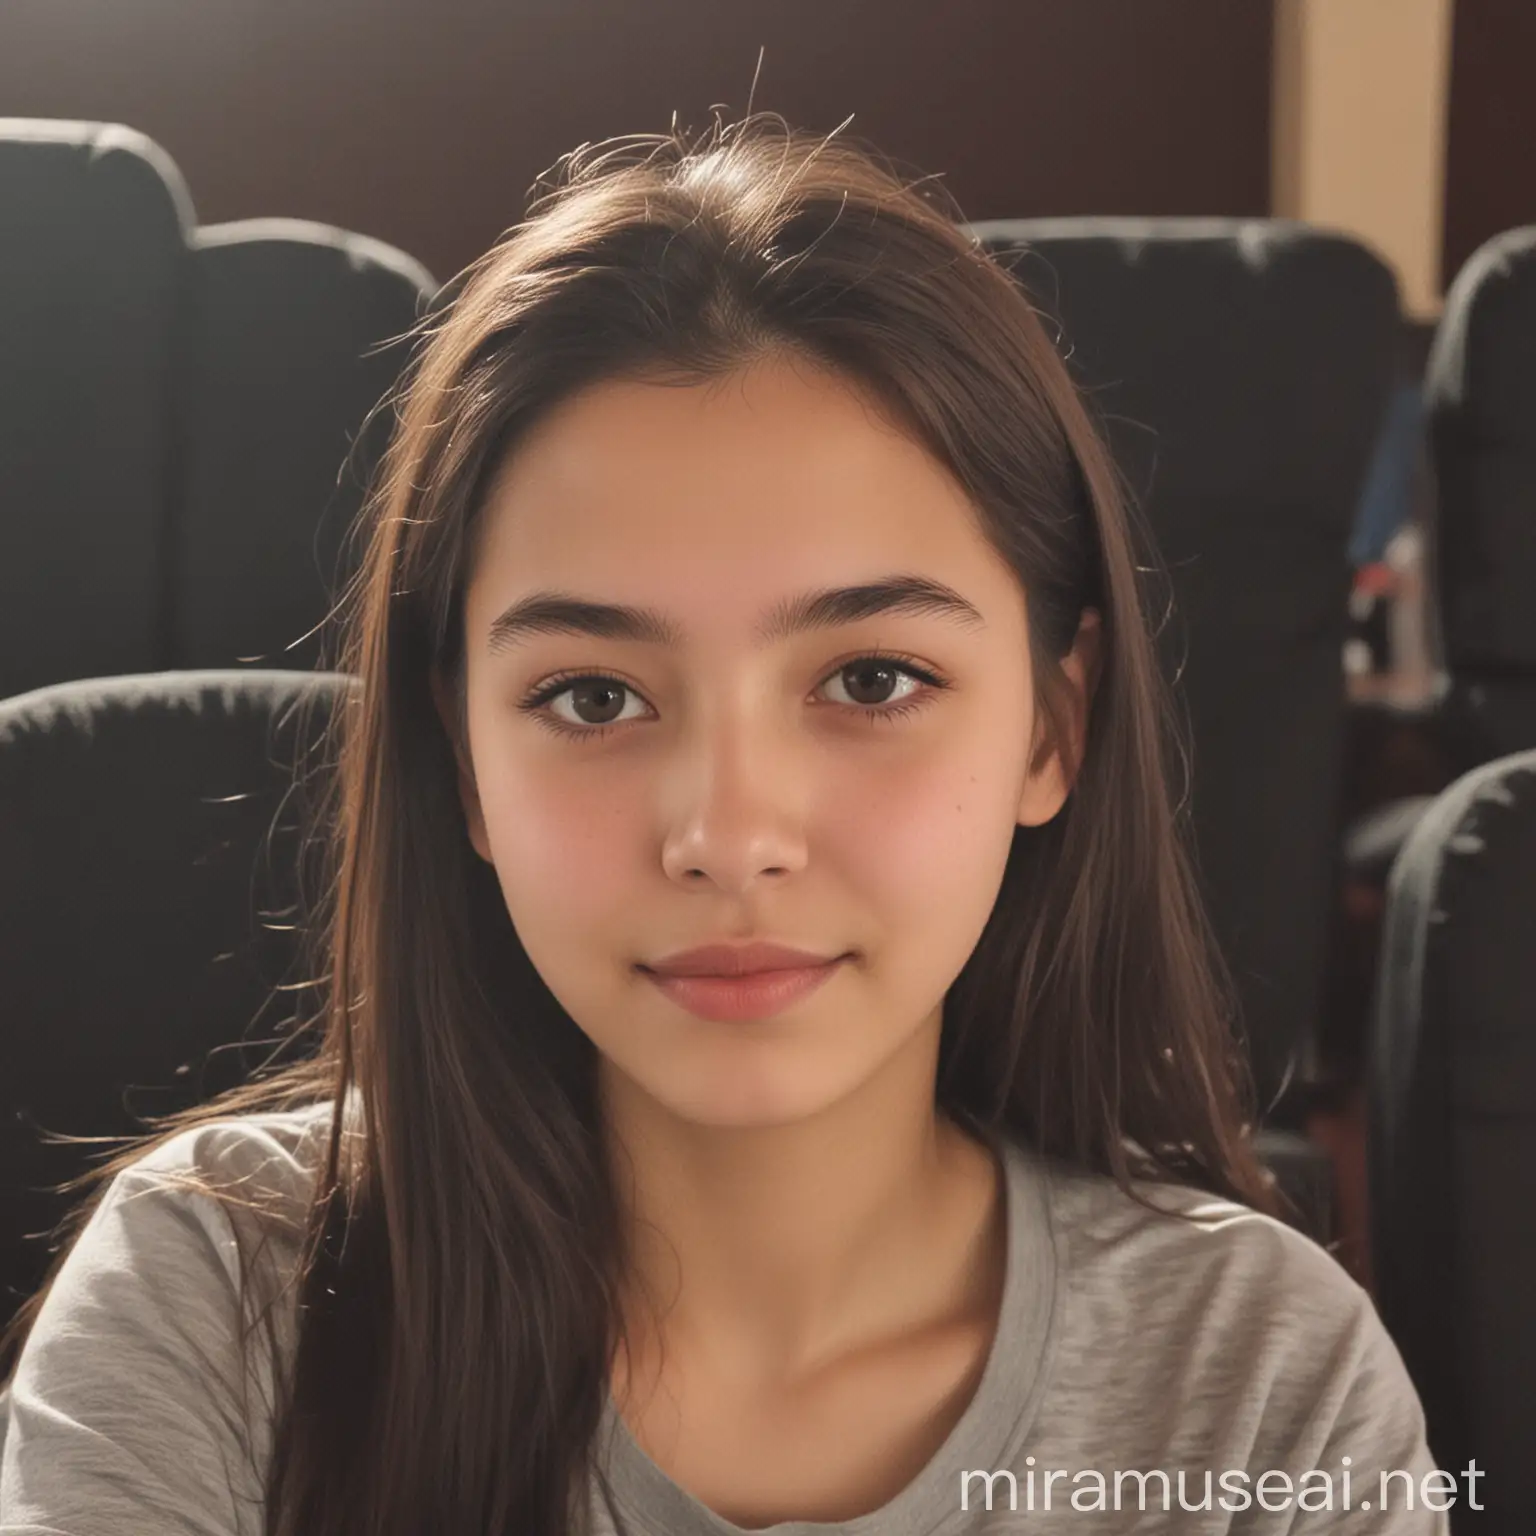 A 17-year-old  girl who  
loves cinema